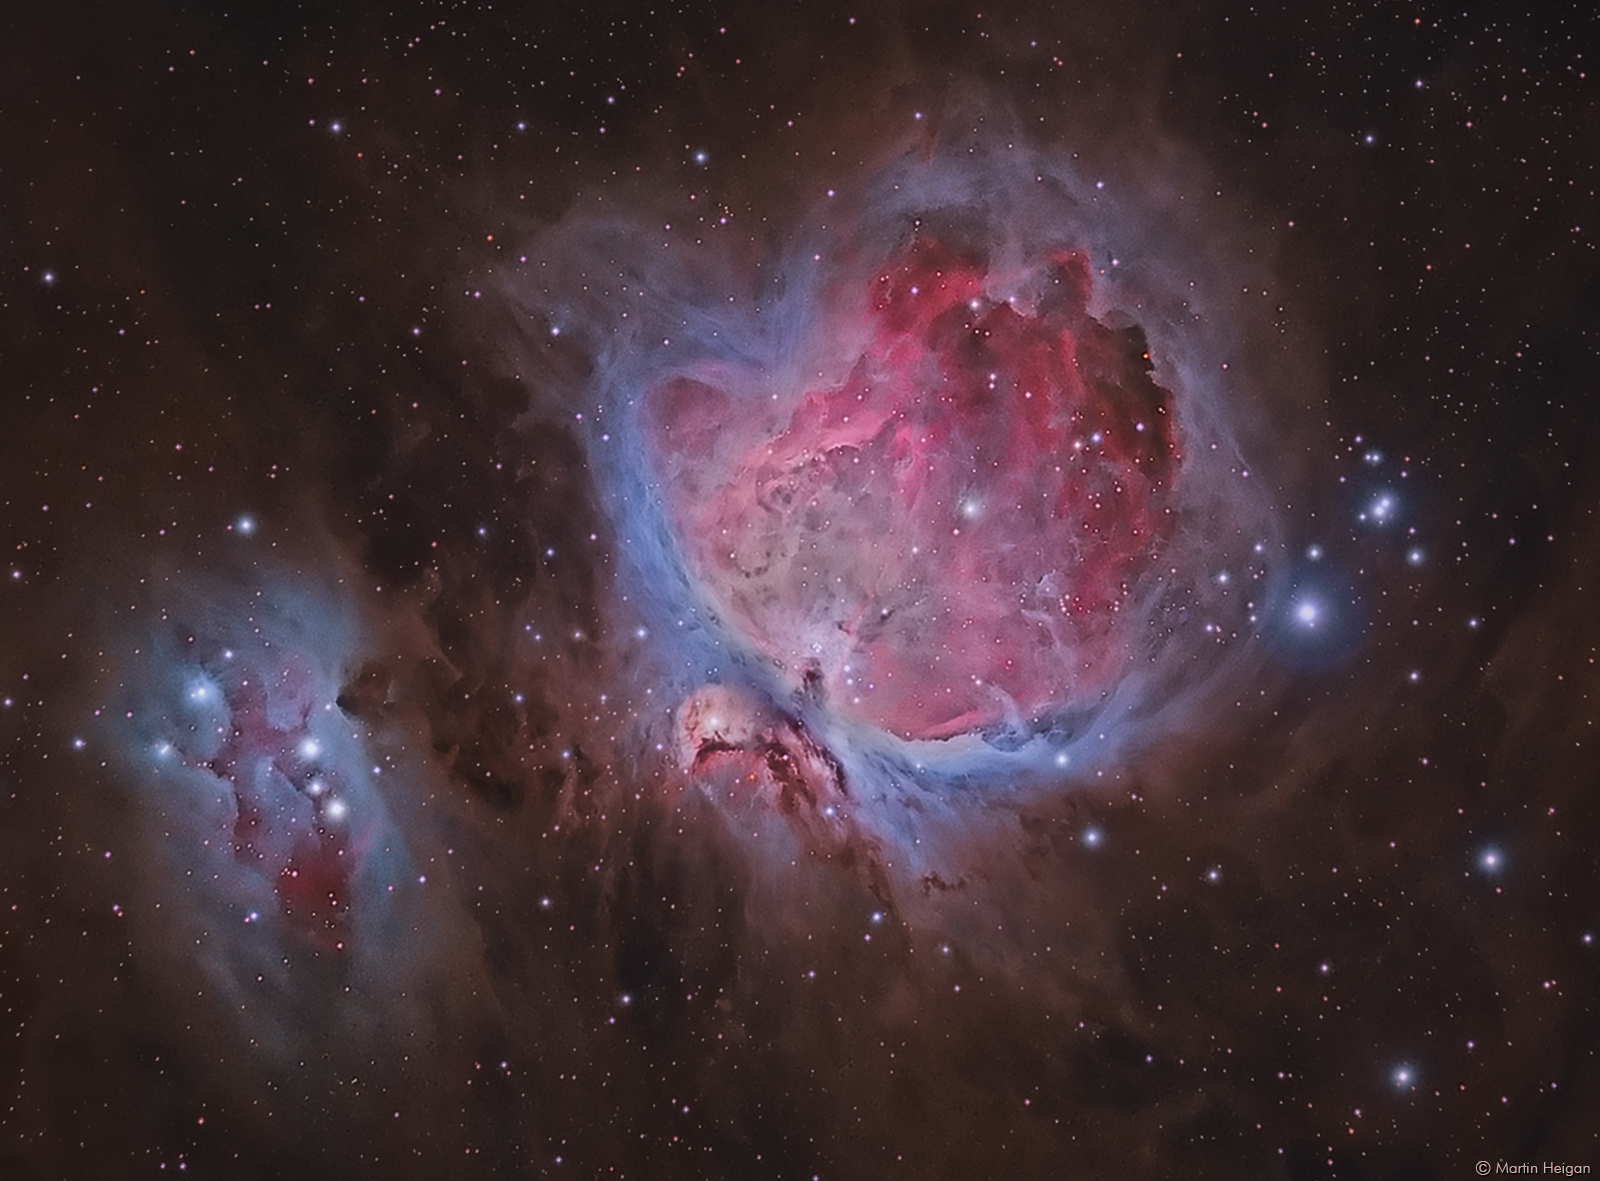 Image of the Month: The Great Nebula in Orion and the Running Man Nebula